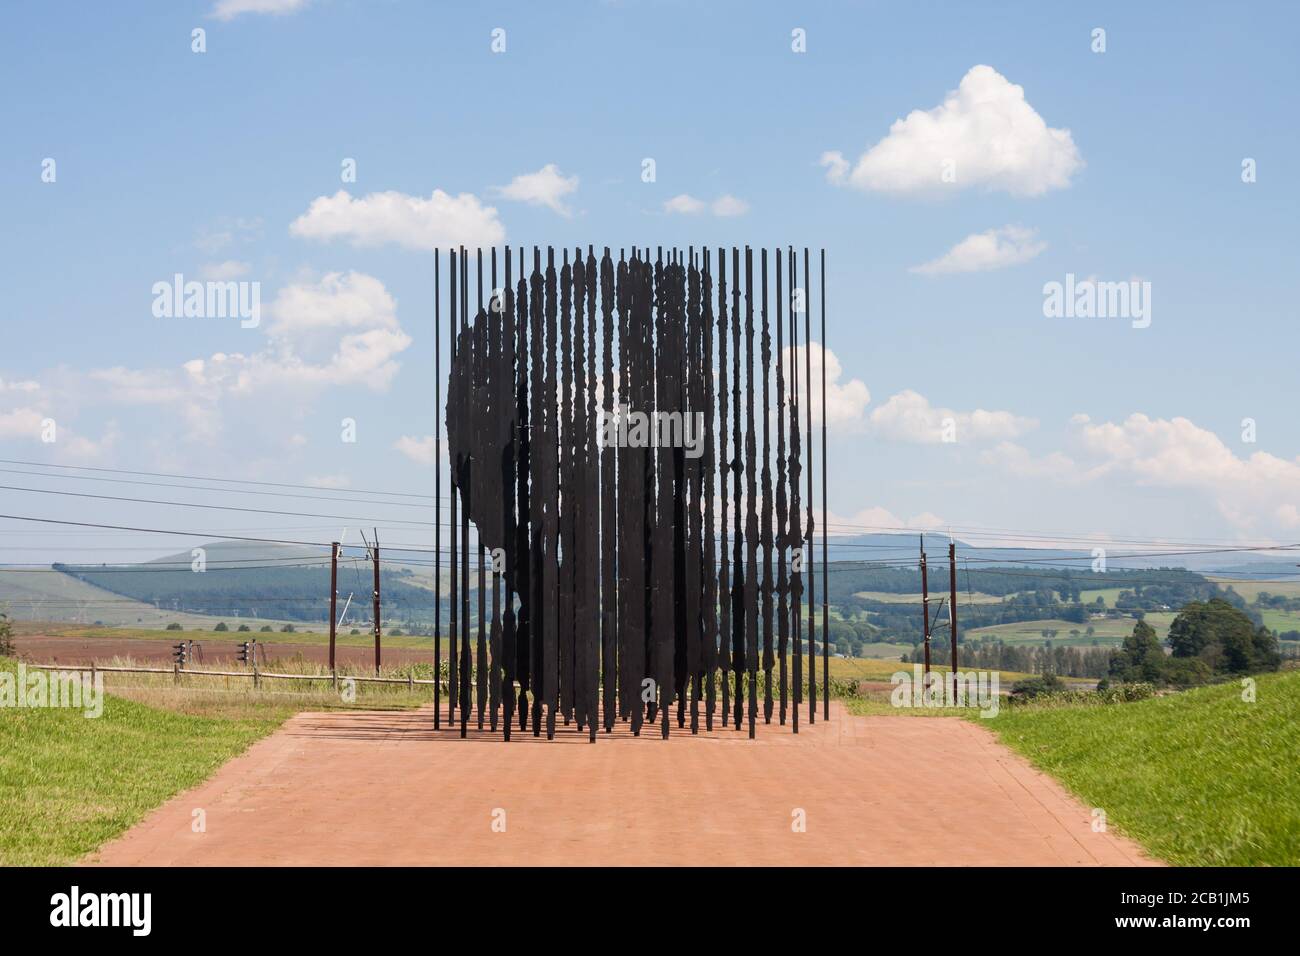 Howick, South Africa March 25 2016: Sculpture monument at Nelson Mandela Capture site Howick, KZN, South Africa. This is where Mandela was arrested in Stock Photo